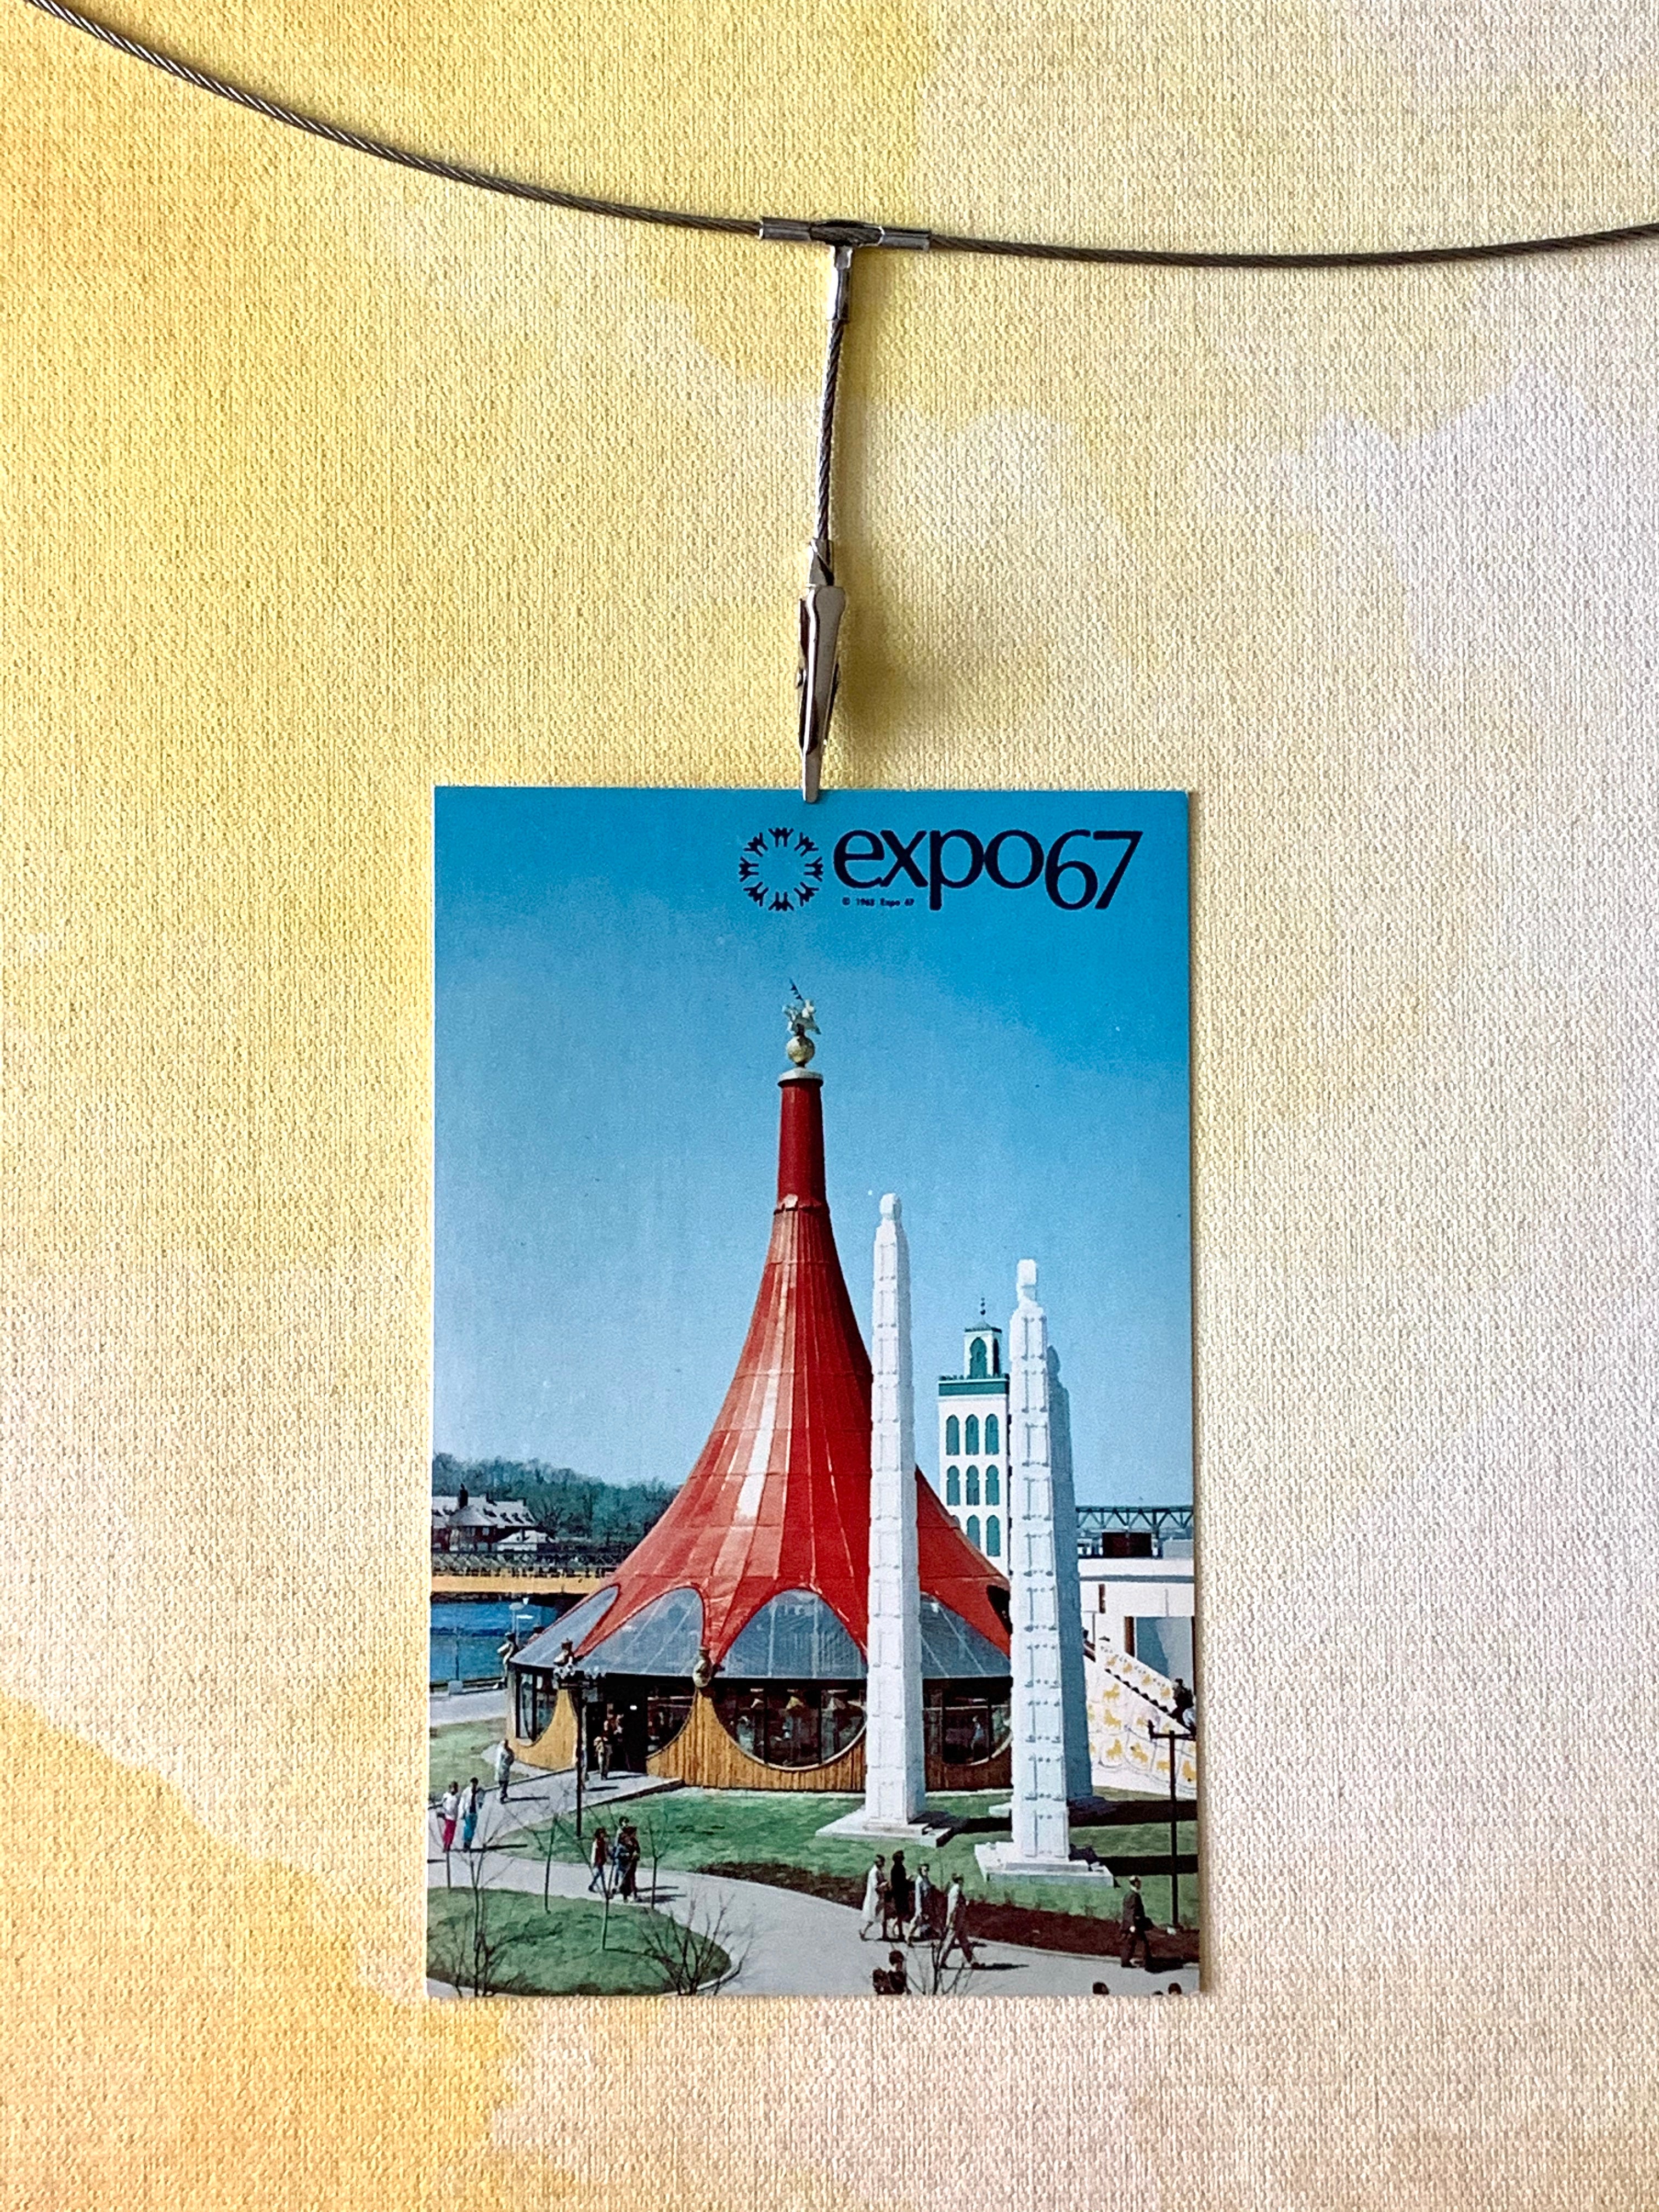 Vintage Postcard Expo 67 Montreal Canada “Pavilion of Ethiopia” on lle Notre-Dame